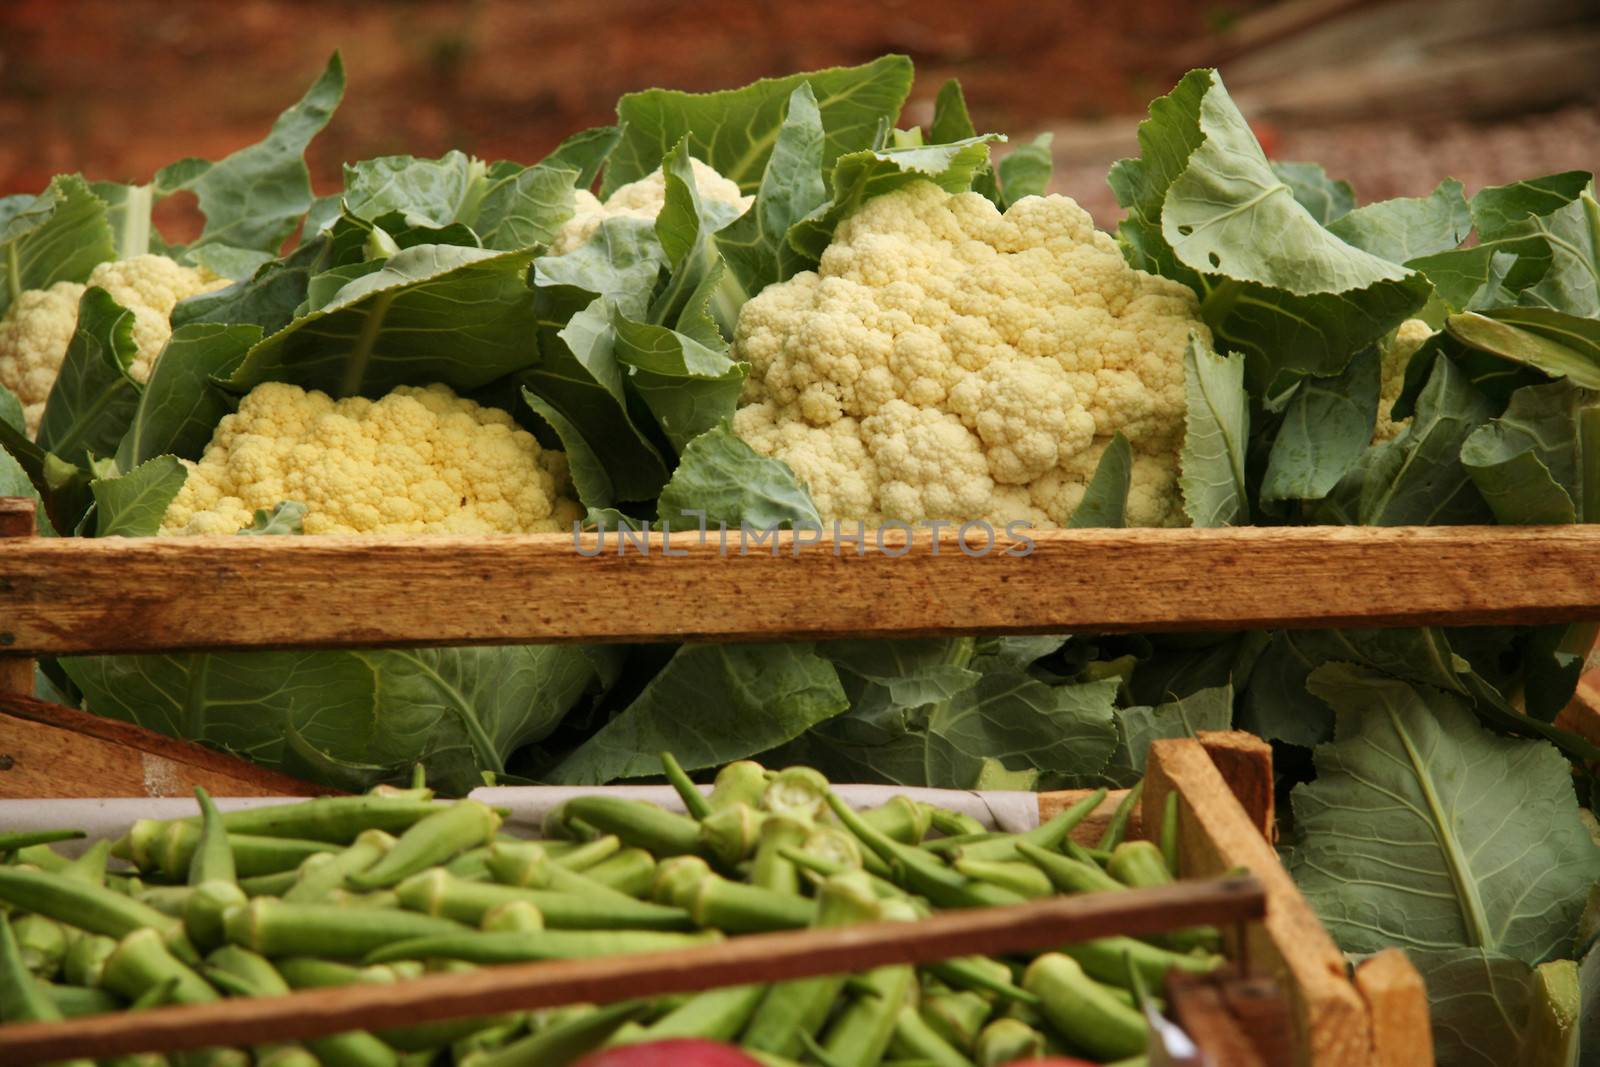 Cauliflowers in open wooden box at a market stall